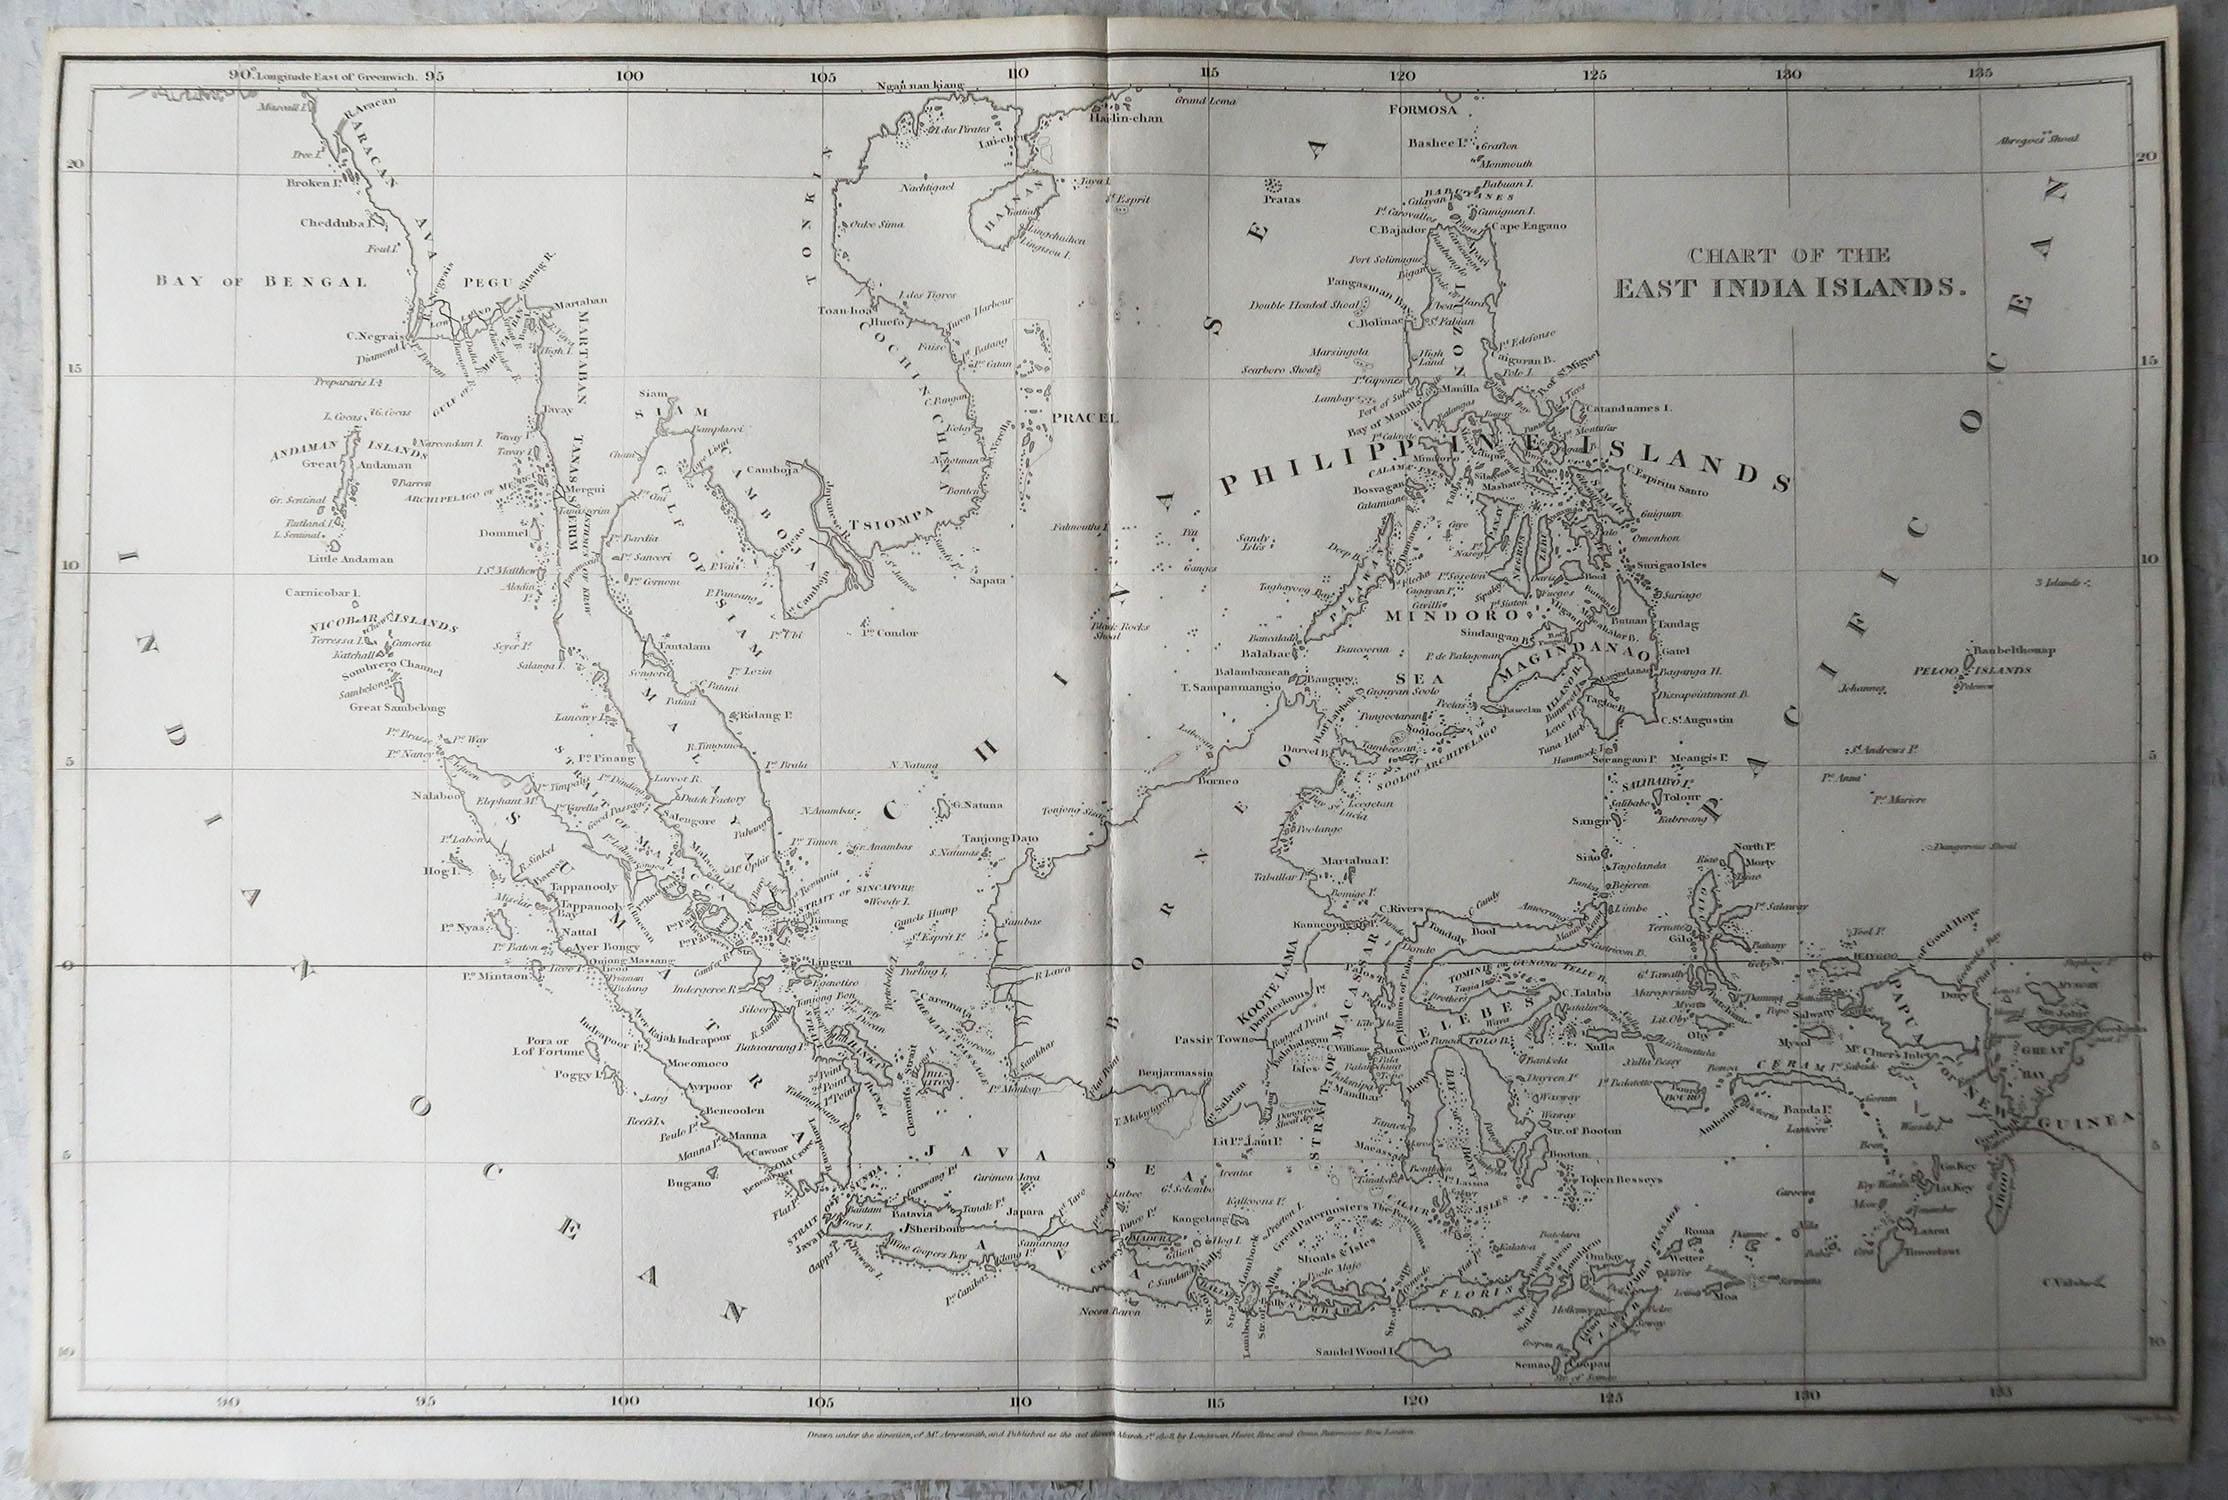 Other Original Antique Map of South East Asia, Arrowsmith, 1820 For Sale